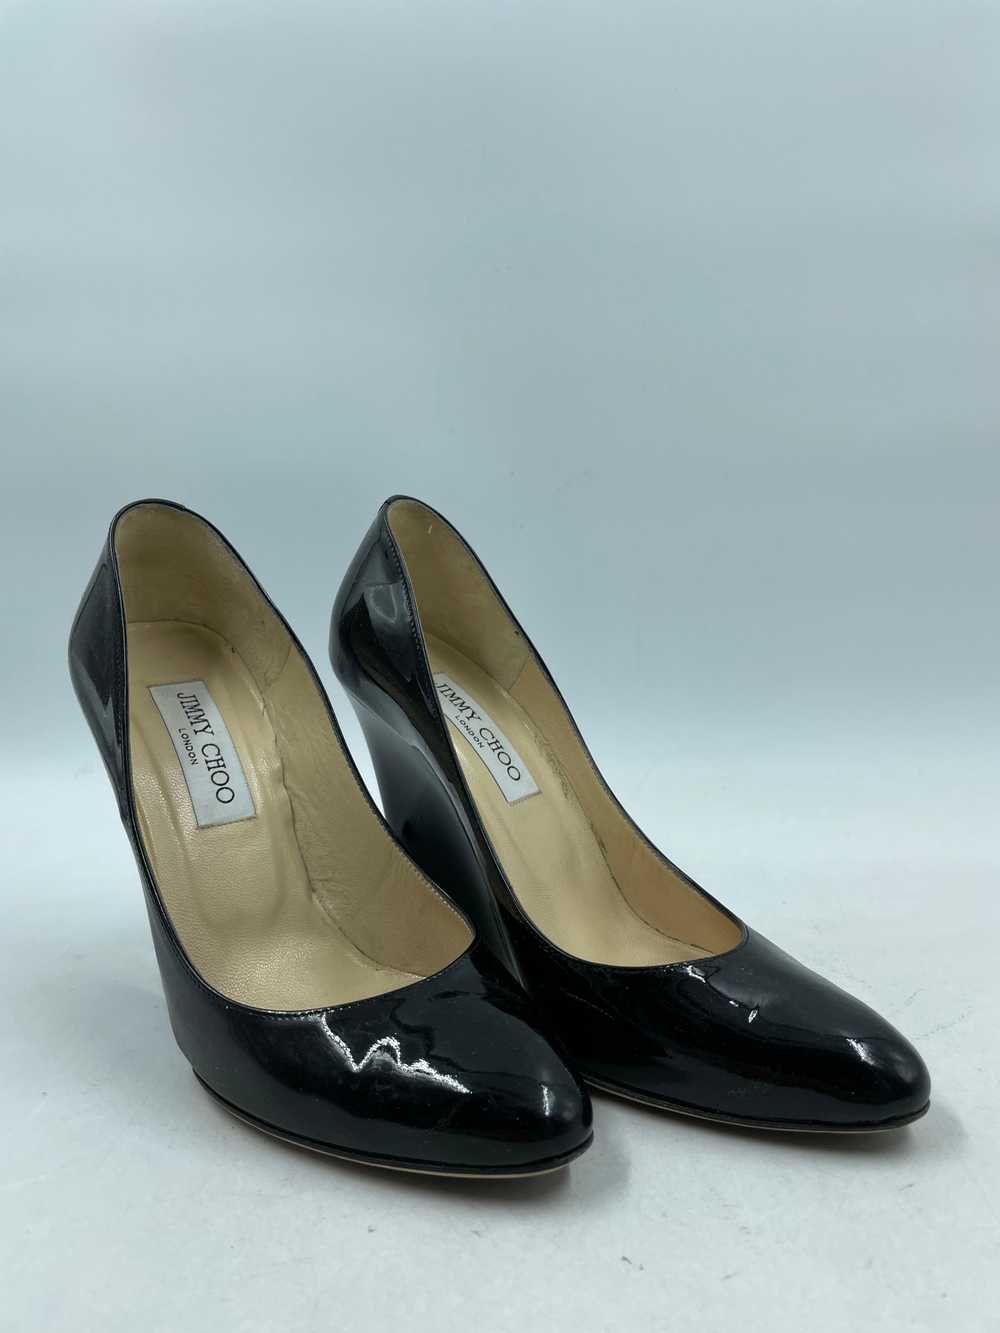 Authentic Jimmy Choo Black Patent Wedge Pumps W 7 - image 3